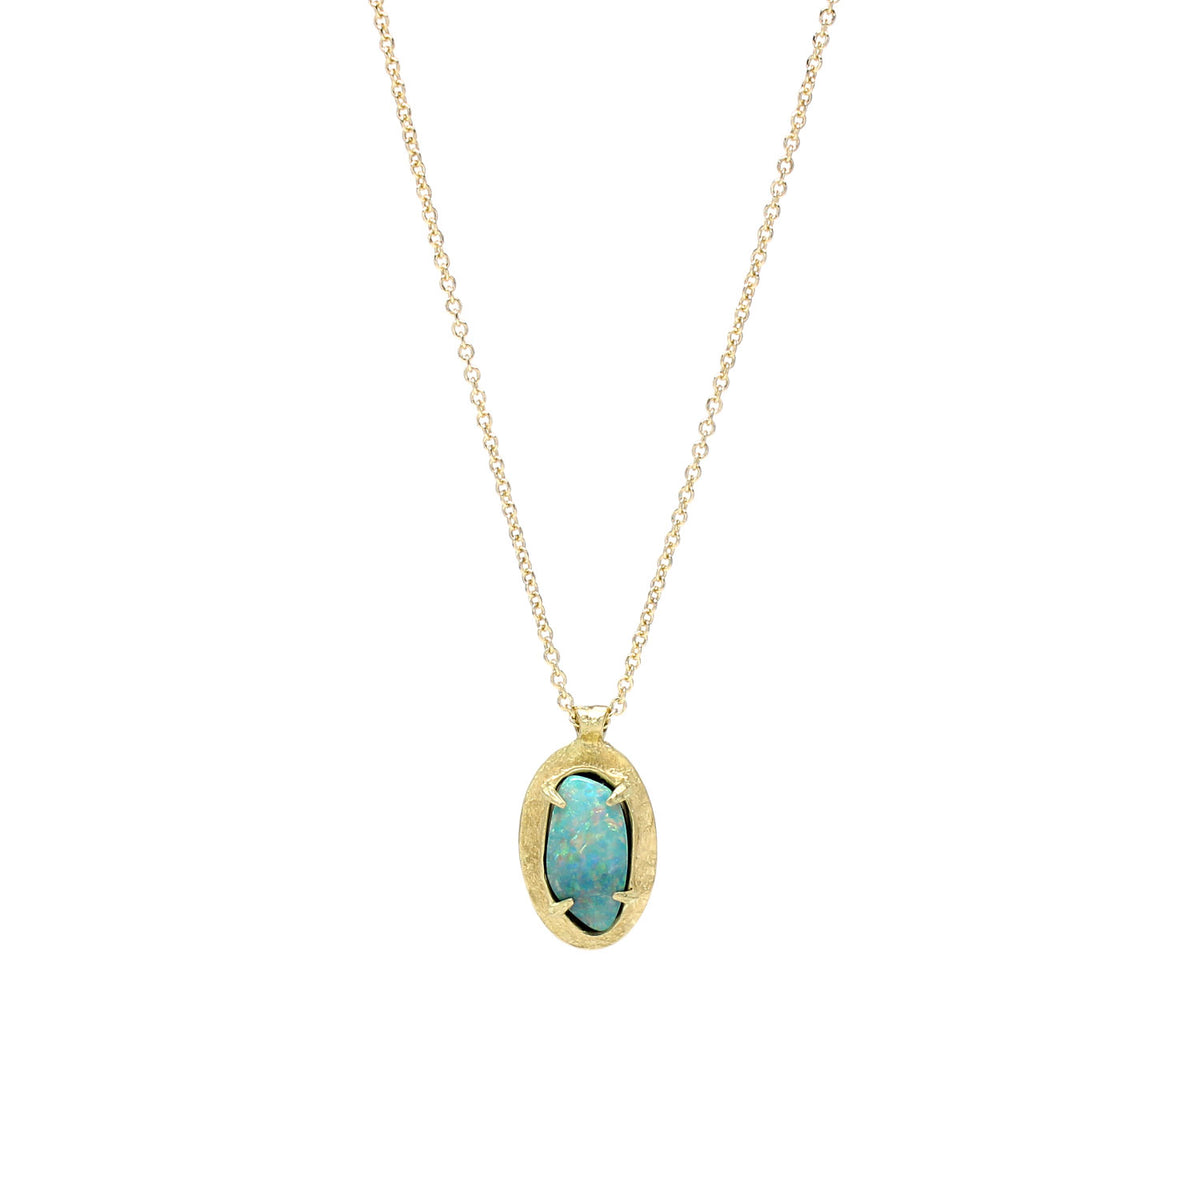 One-of-a-Kind Opal Doublet Oval Necklace